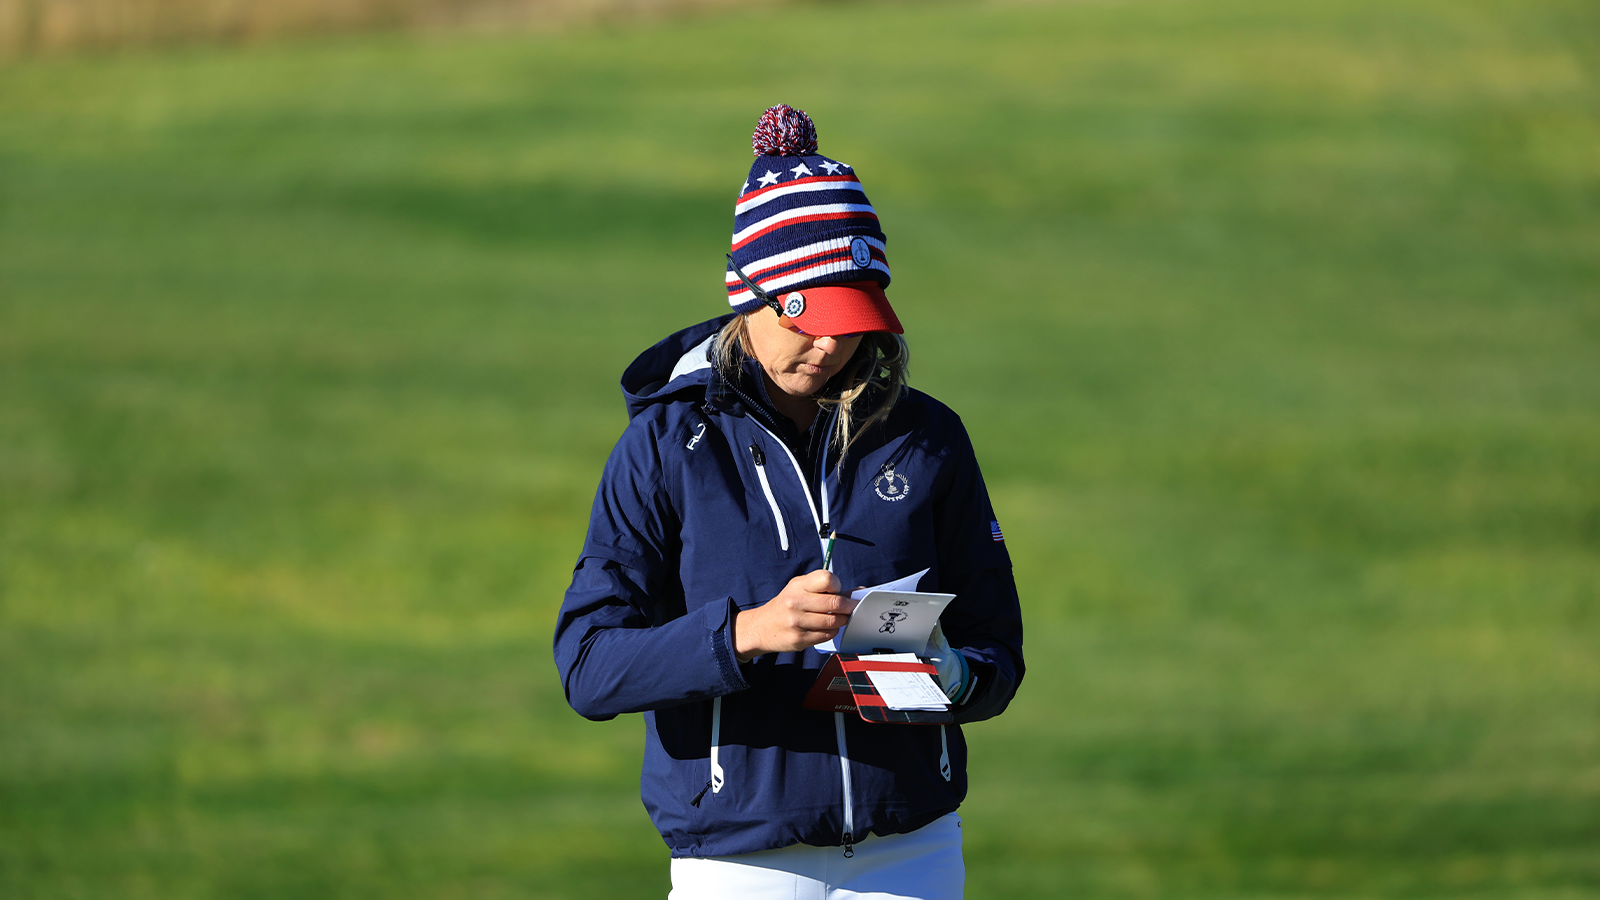 Ashley Grier of Team USA during a practice round for the 2nd PGA Women's Cup at Twin Warriors Golf Club on Tuesday, October 25, 2022 in Santa Ana Pueblo, New Mexico. (Photo by Sam Greenwood/PGA of America)